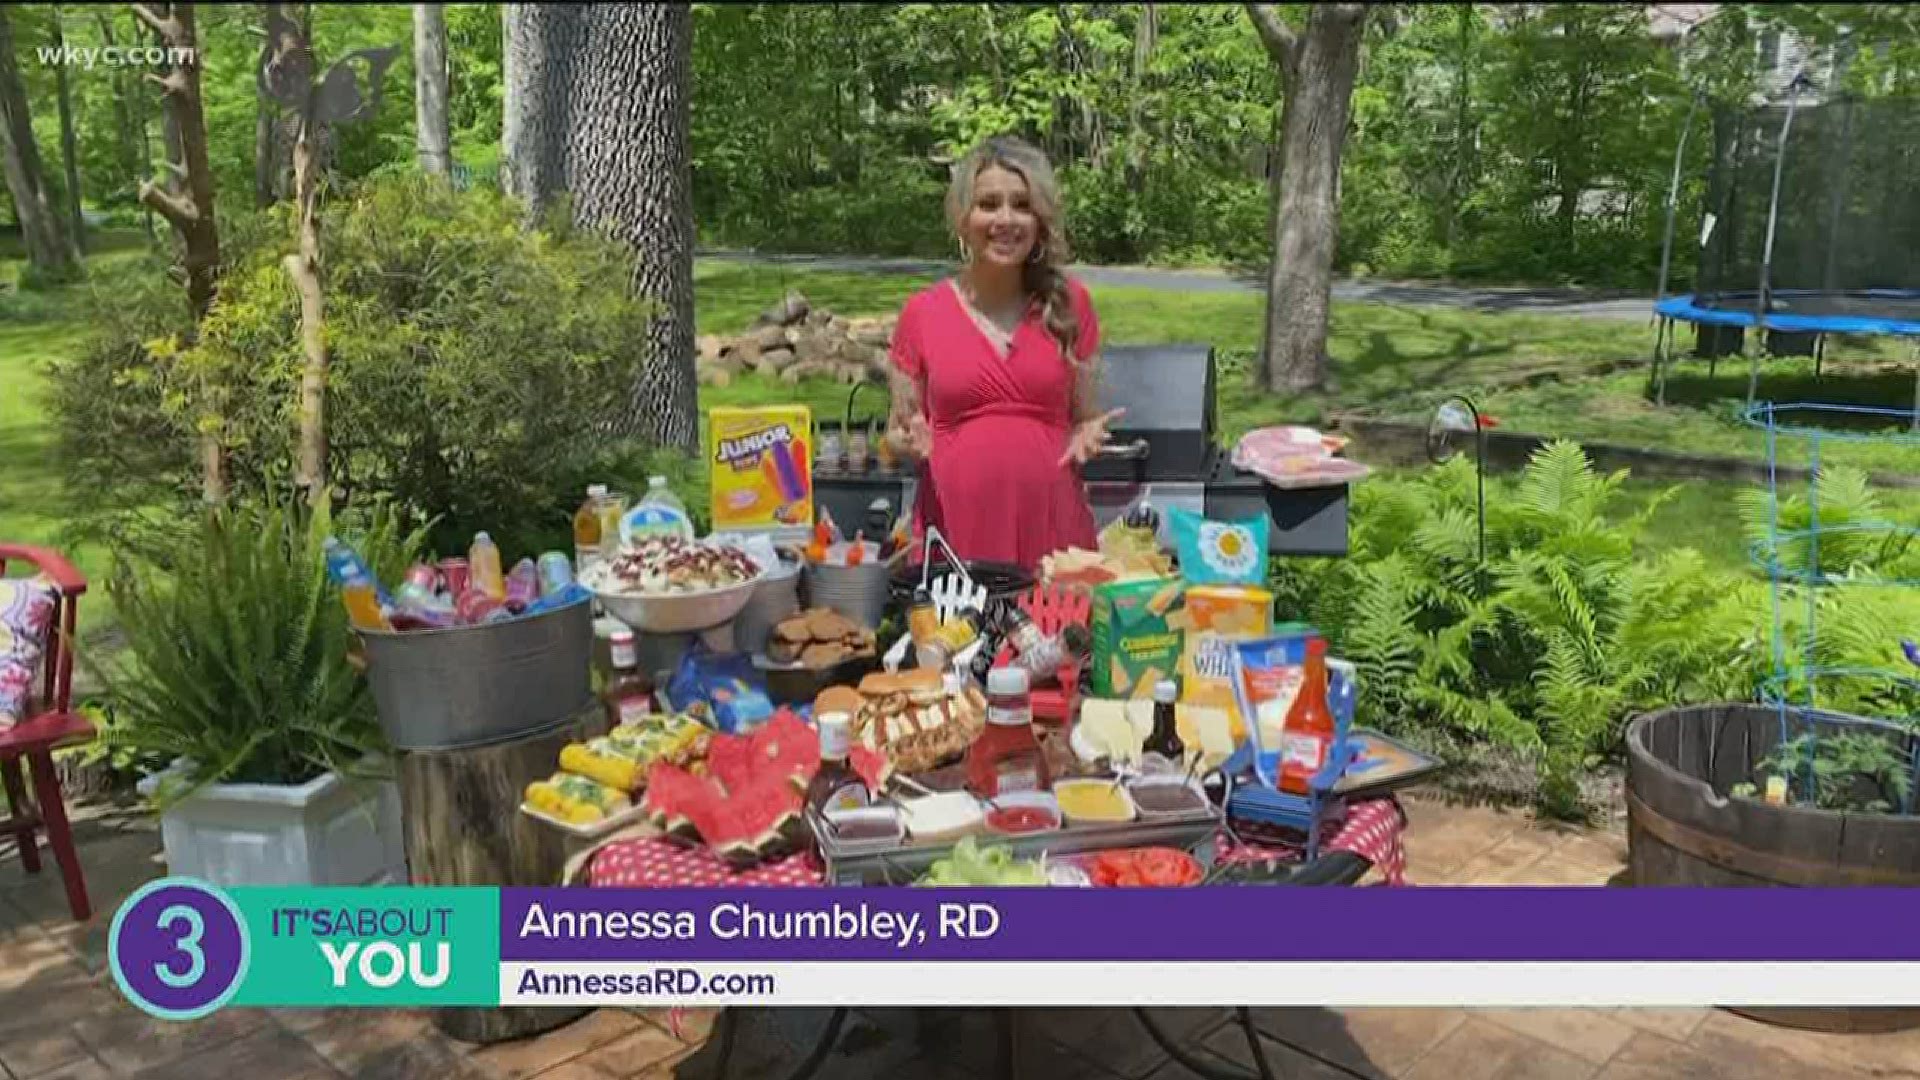 Annessa Chumbley helps us save money while putting together the best Memorial Day Barbecue you could imagine.